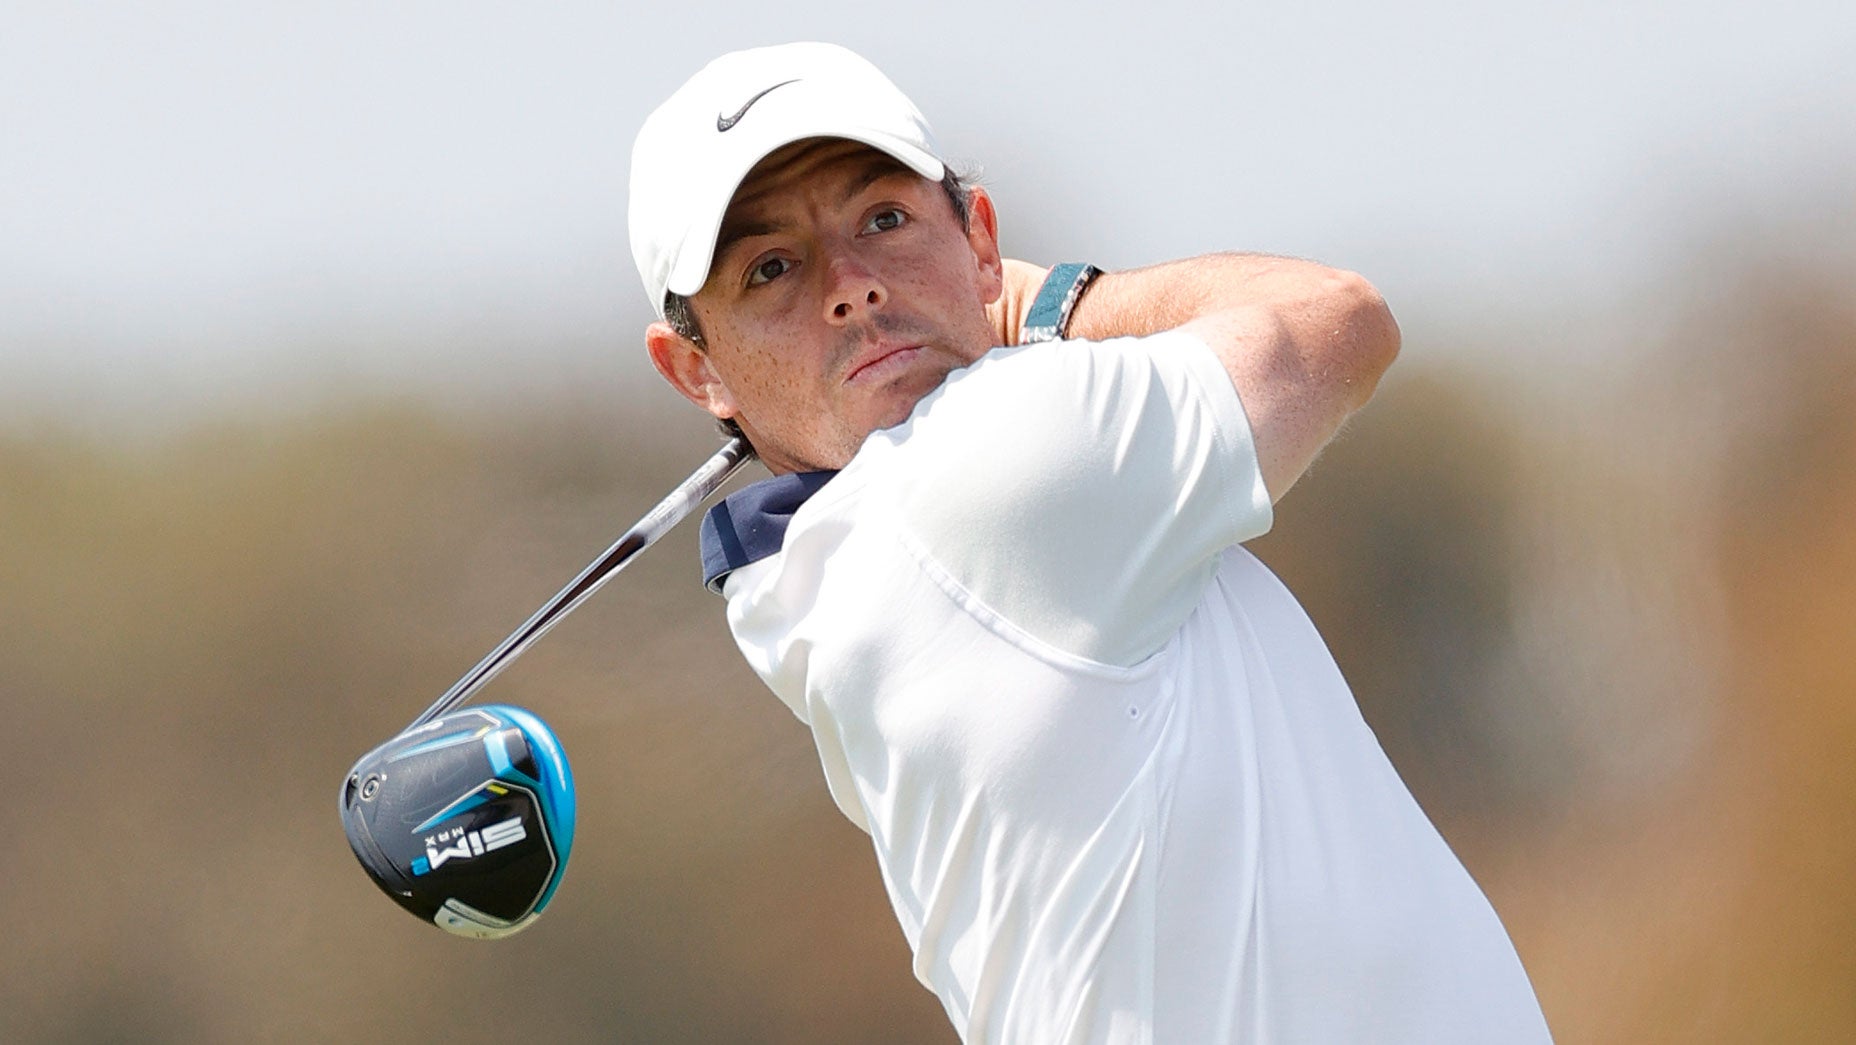 Rory McIlroy did something that he’s done only 7 other times since 2014